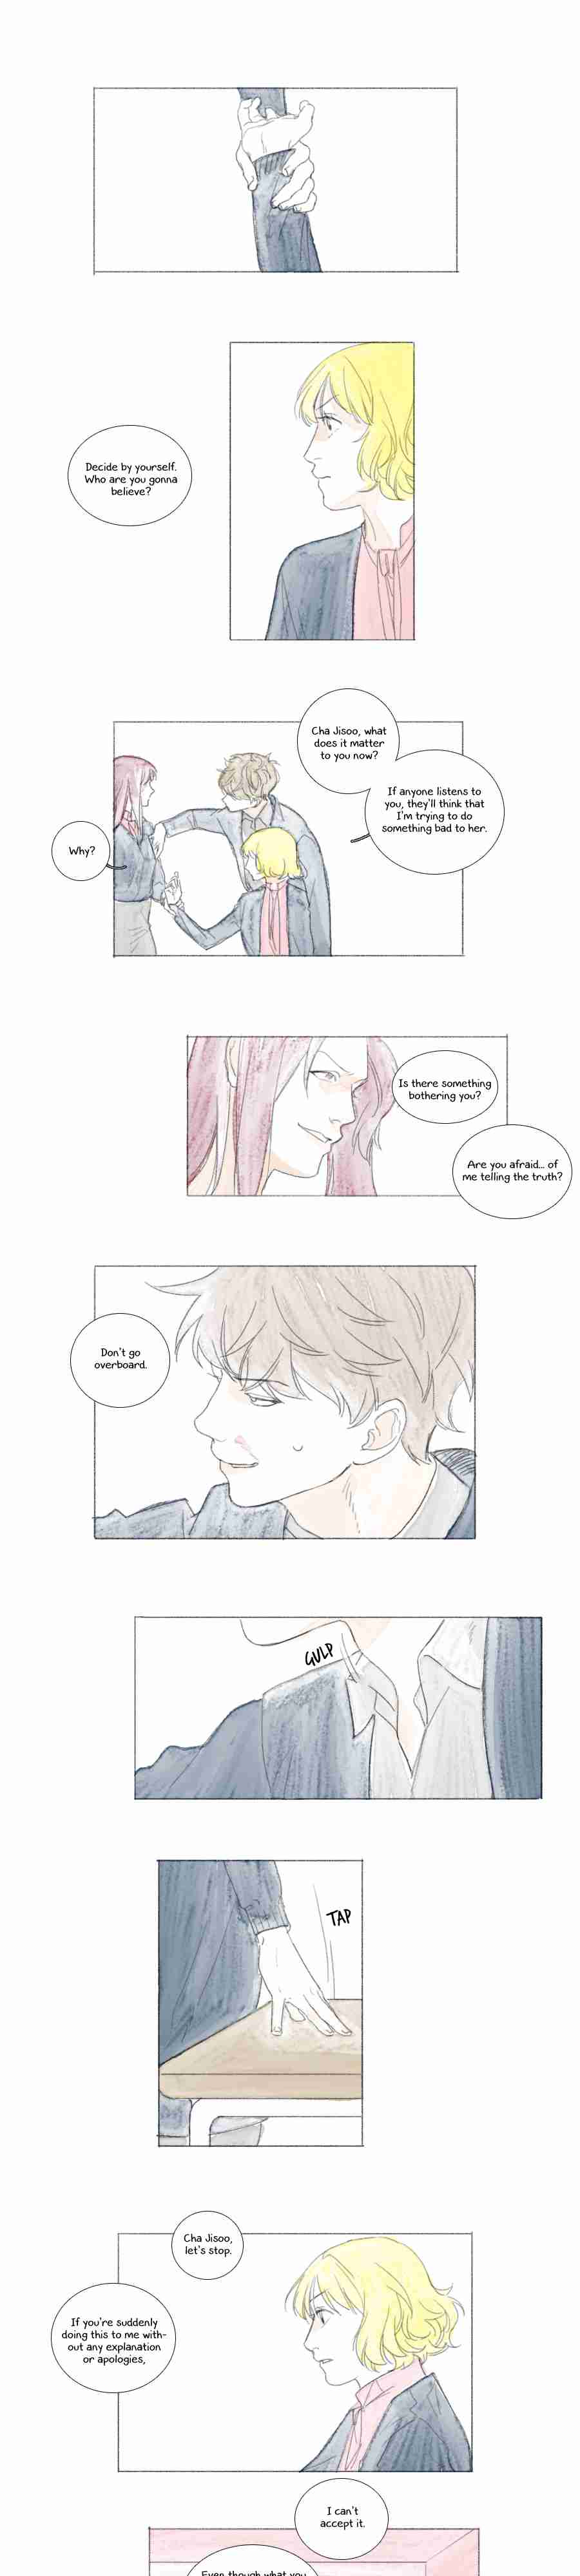 Catboy Catday Ch. 47 Process